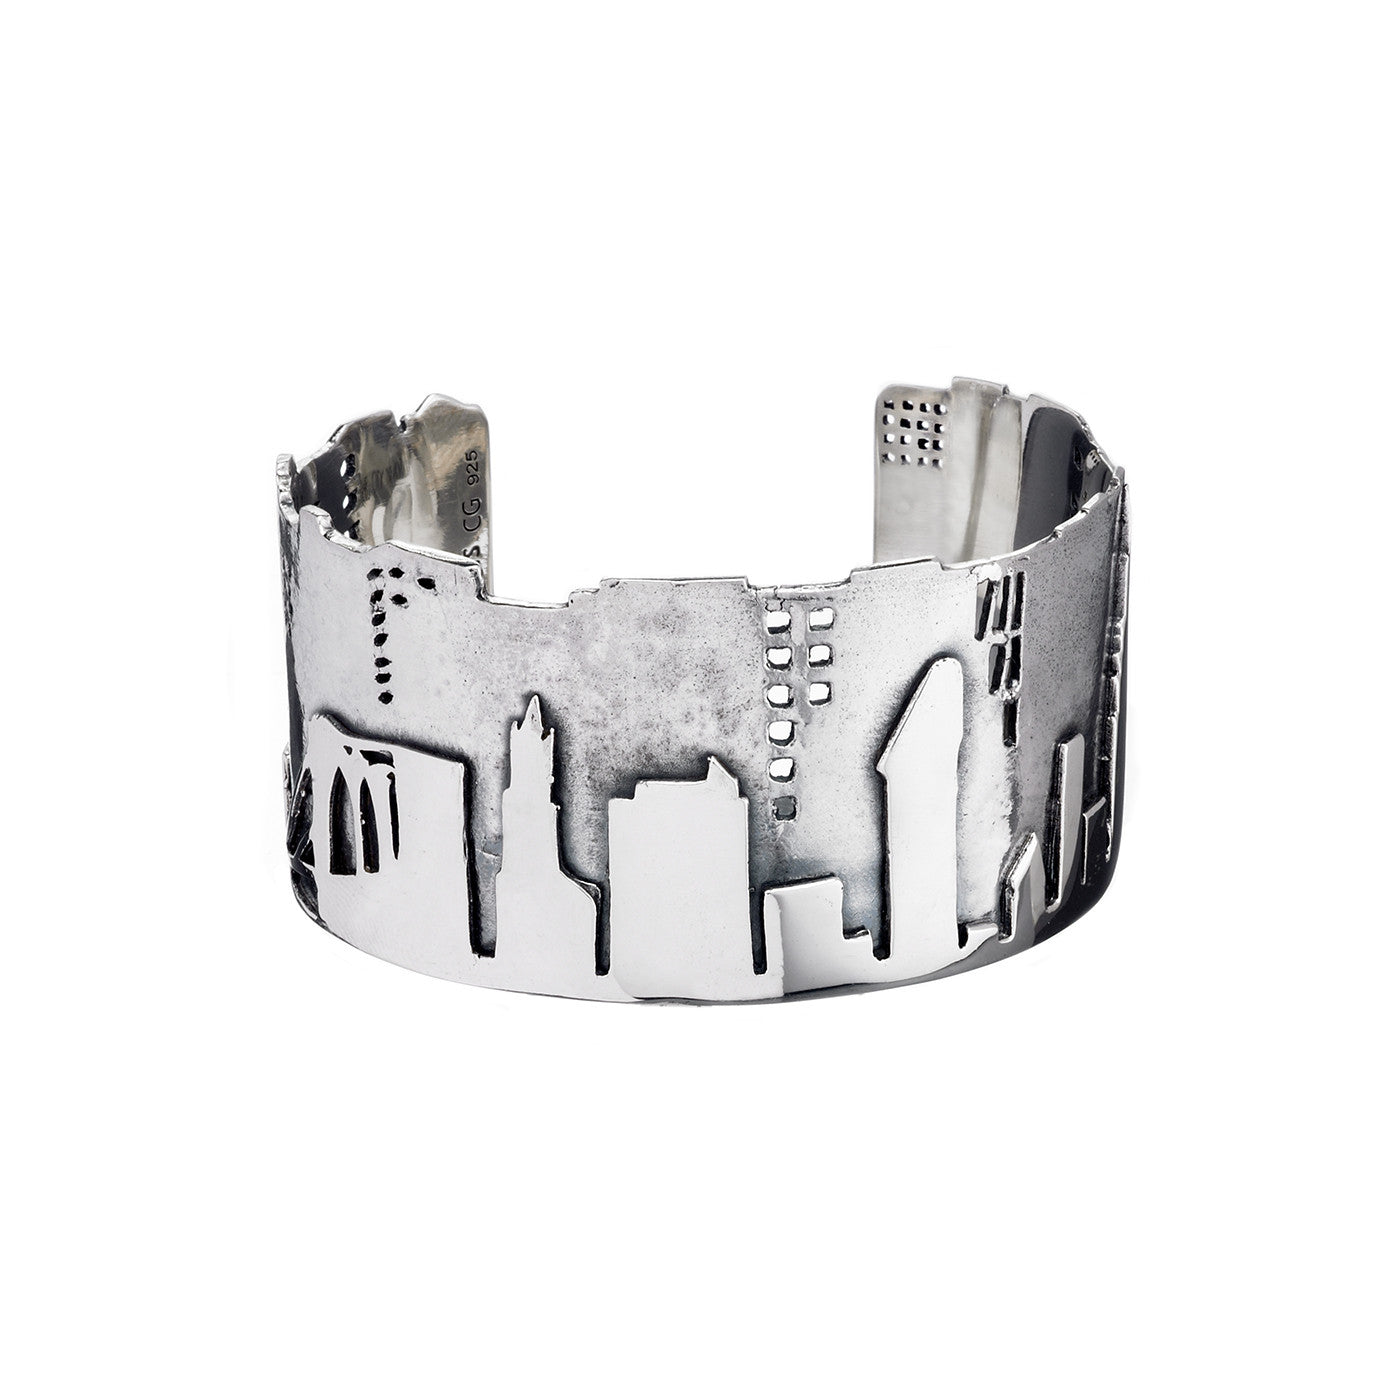 NYC Skyline The City That Never Sleeps Sterling Silver Bracelet Cuff - Cynthia Gale New York - 2